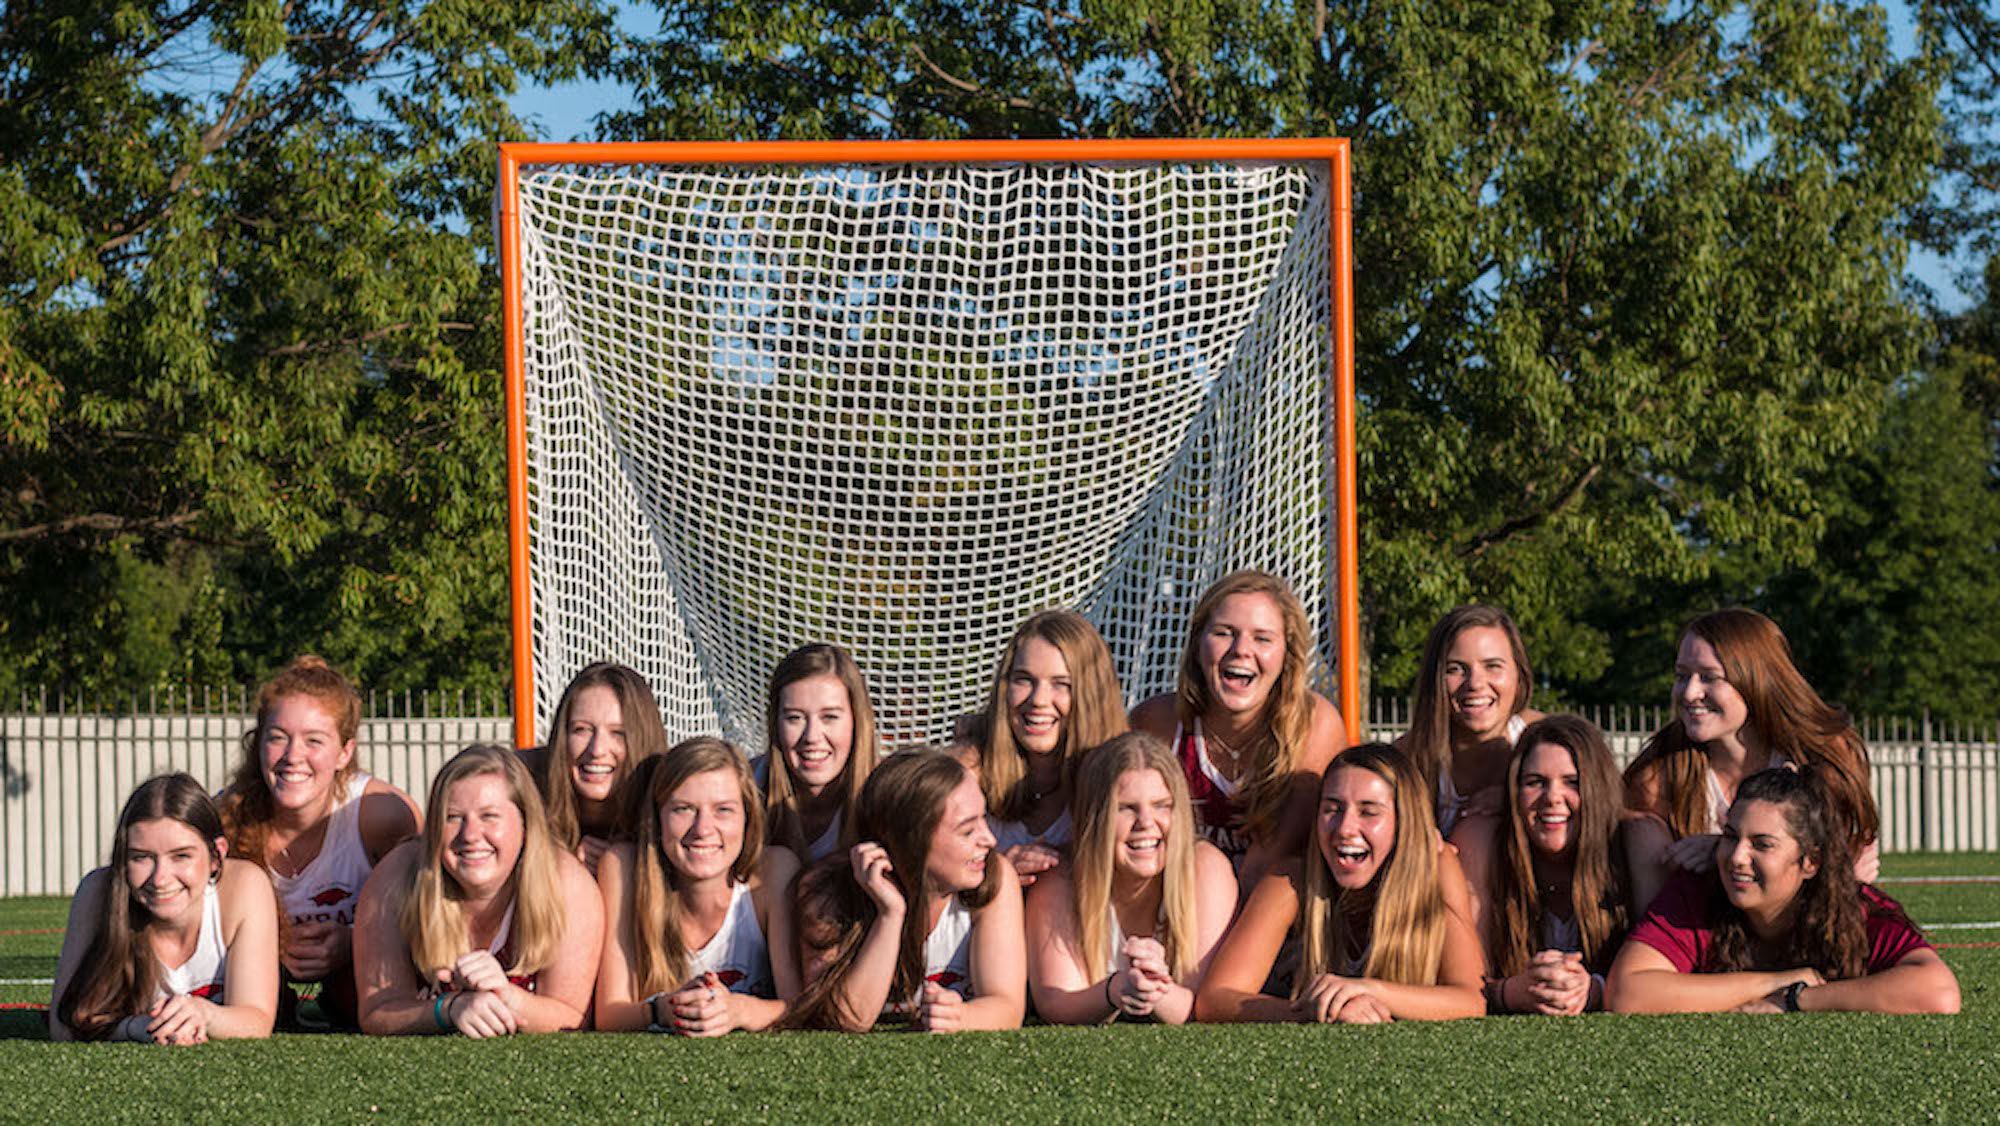 Donate to support student-run clubs like Women's Lacrosse